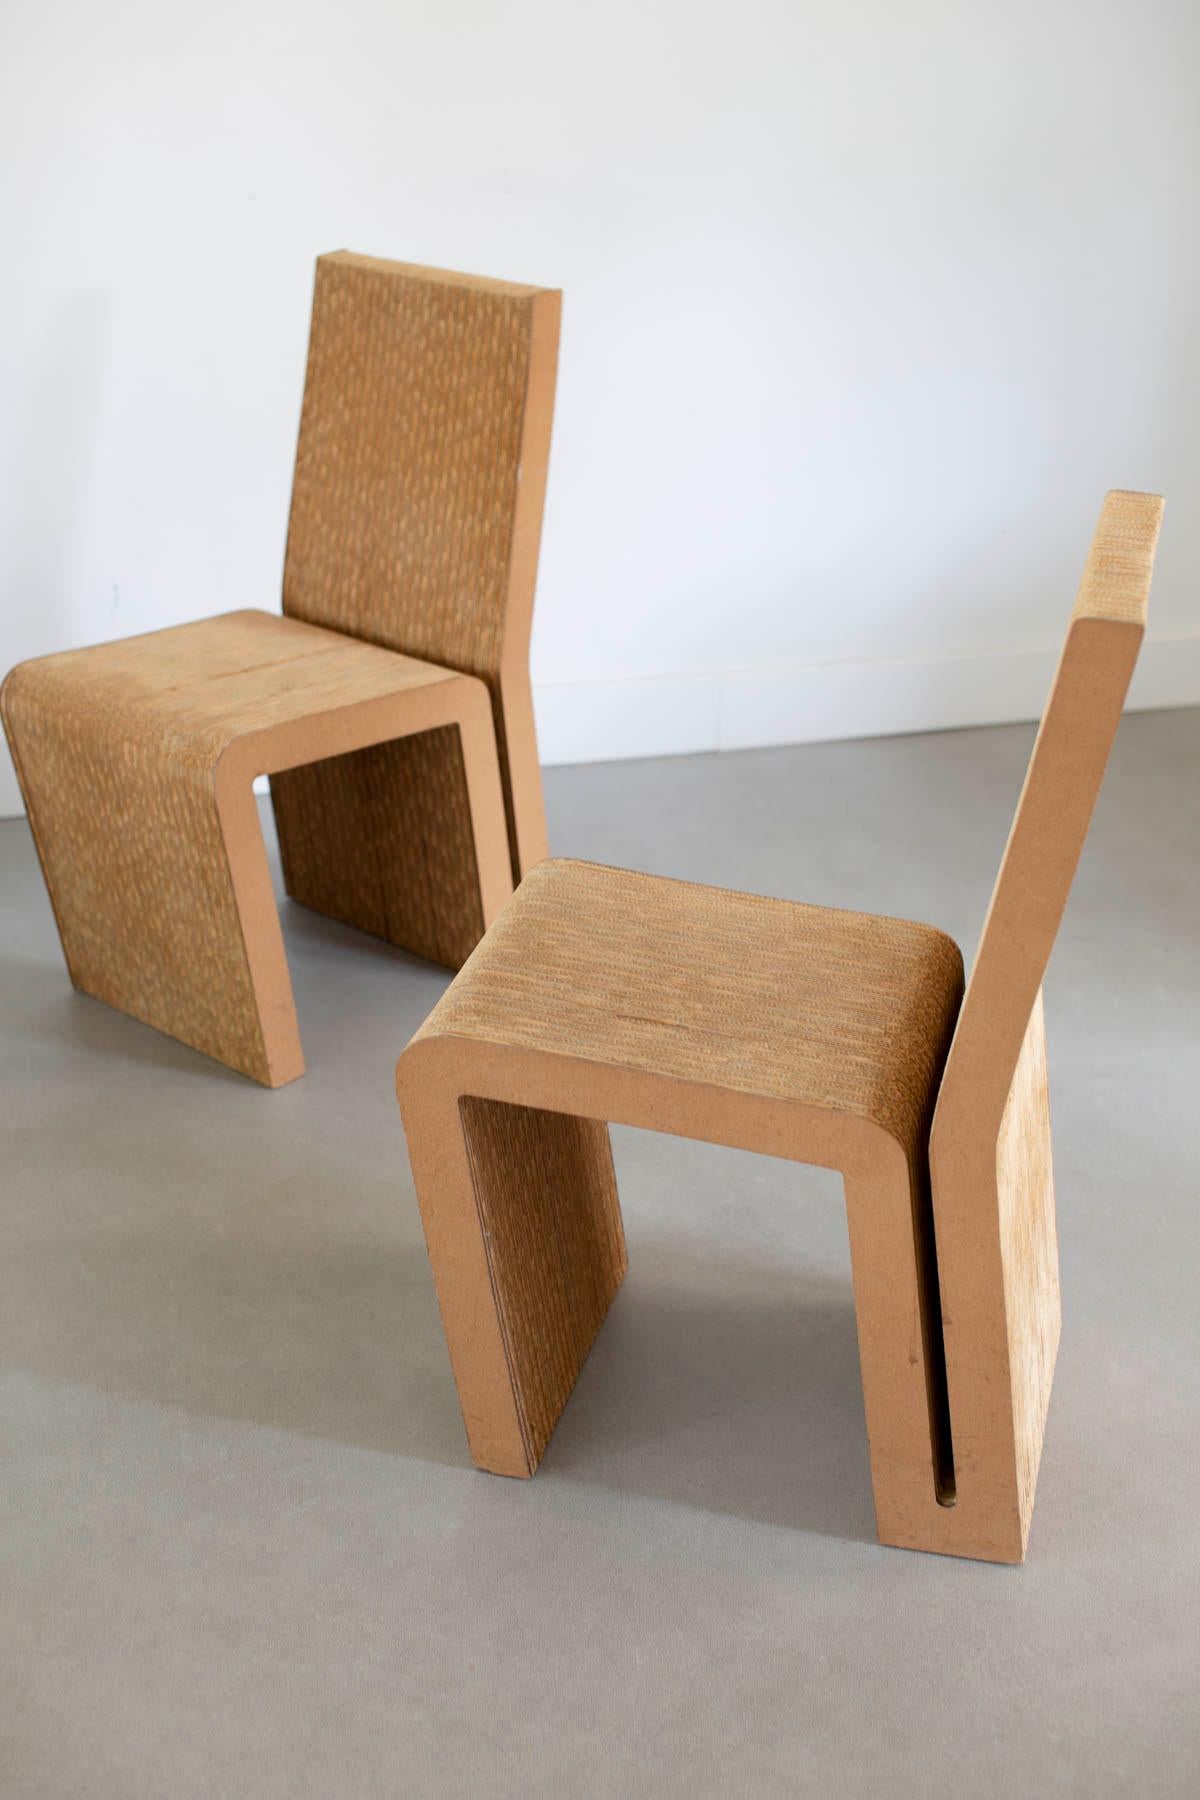 This series of chairs is part of Gehry's larger 